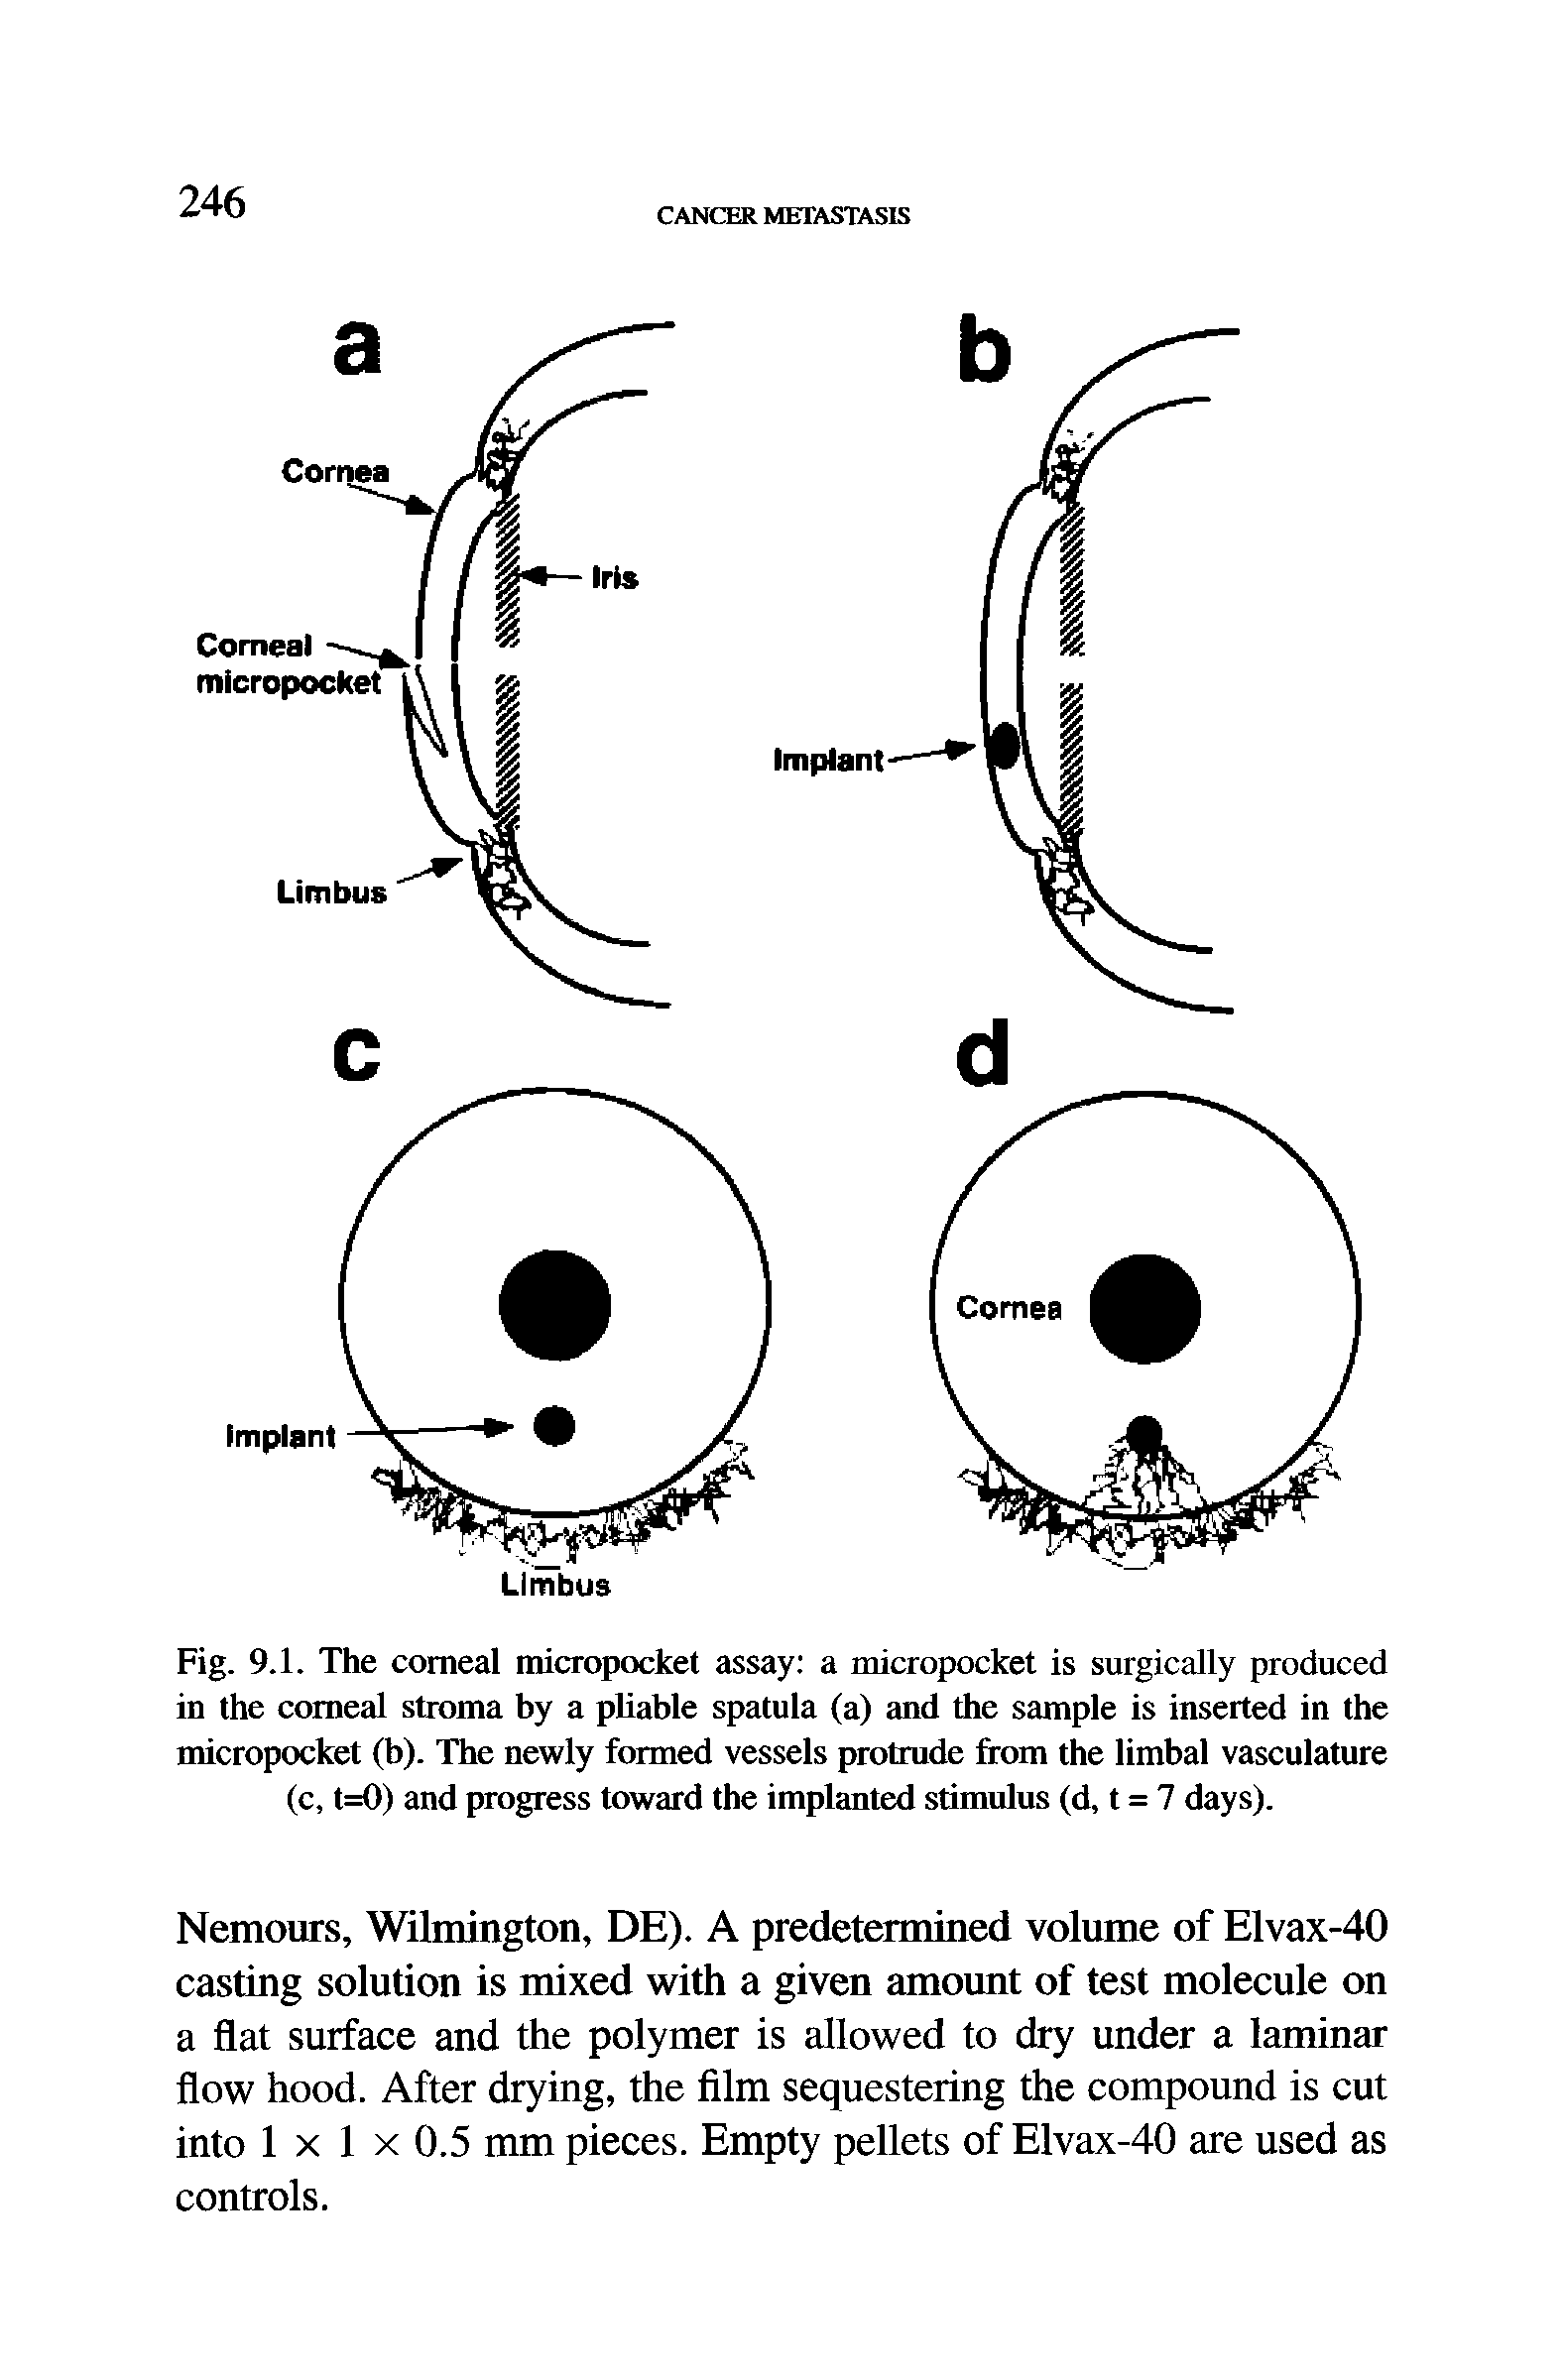 Fig. 9.1. The corneal micropocket assay a micropocket is surgically produced in the comeal stroma by a pliable spatula (a) and the sample is inserted in the micropocket (b). The newly formed vessels protrade from the limbal vasculature (c, t=0) and progress toward the implanted stimulus (d, t = 7 days).